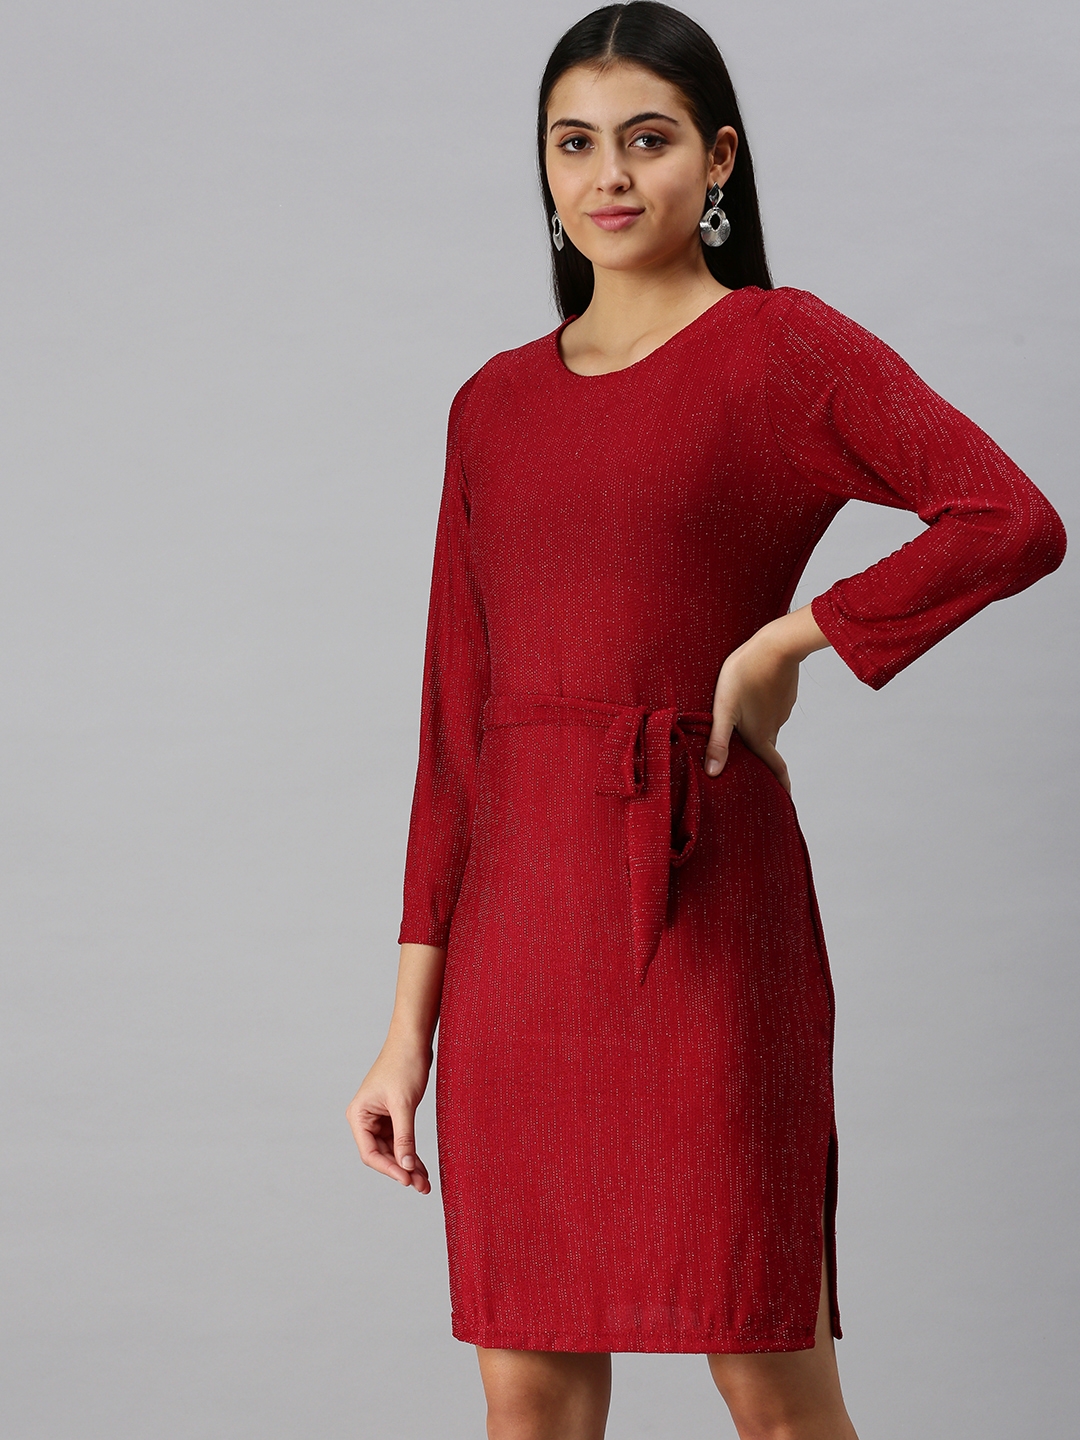 Women's Red Polyester Solid Dresses